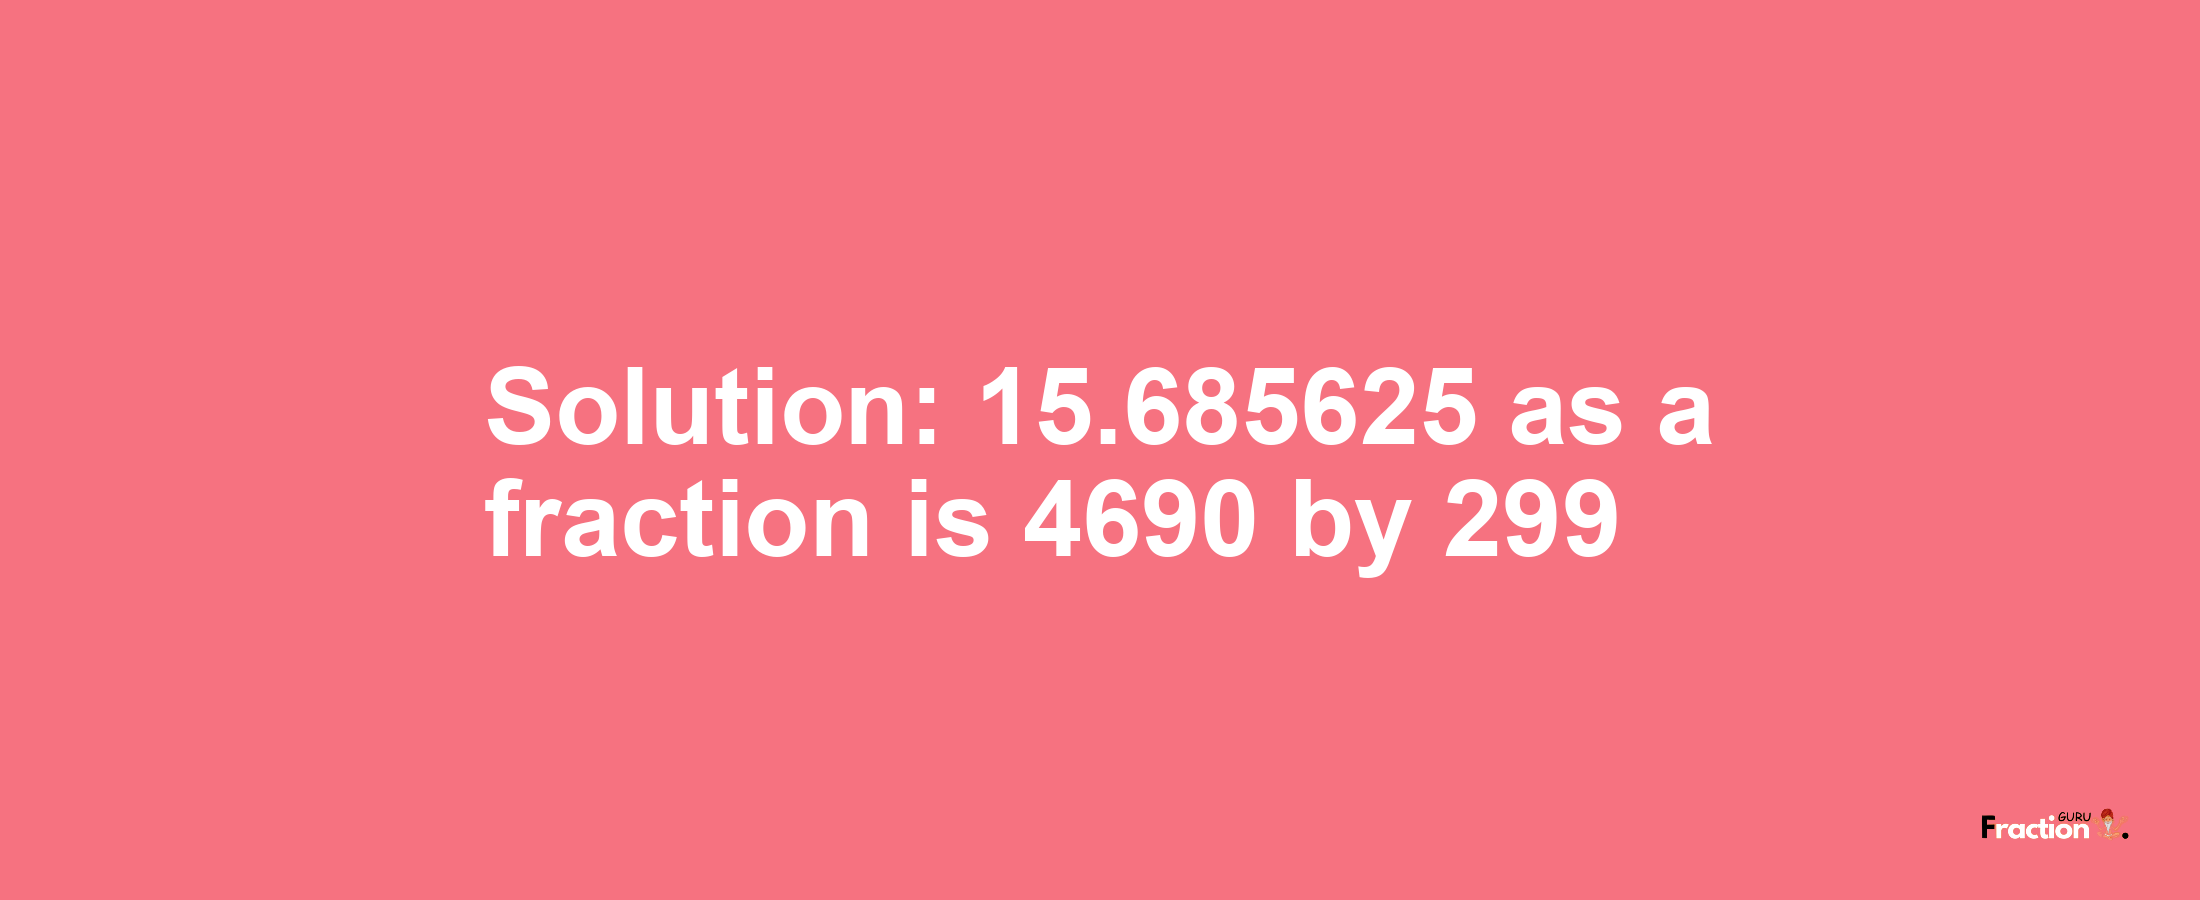 Solution:15.685625 as a fraction is 4690/299